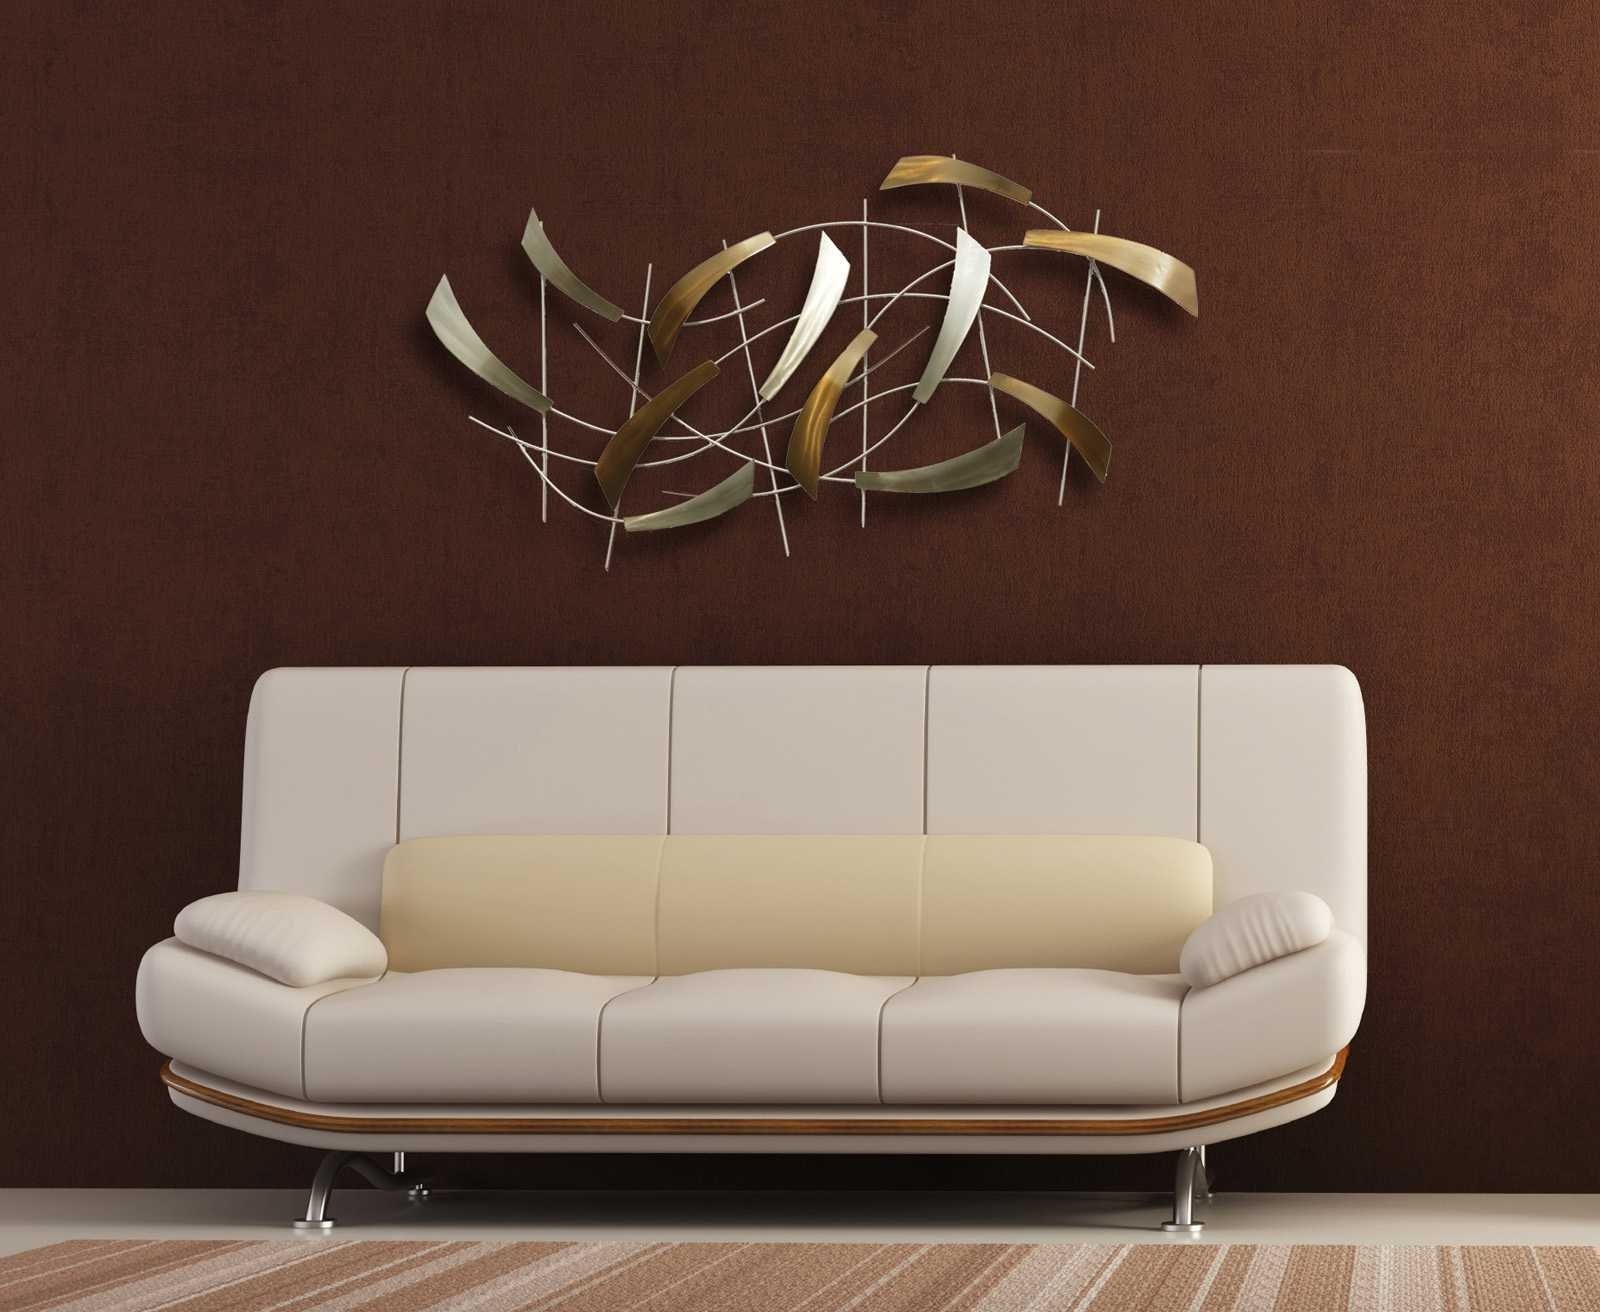 Widely Used Popular 203 List Contemporary Wall Art Decor Intended For Unique Modern Wall Art And Decor (View 13 of 15)